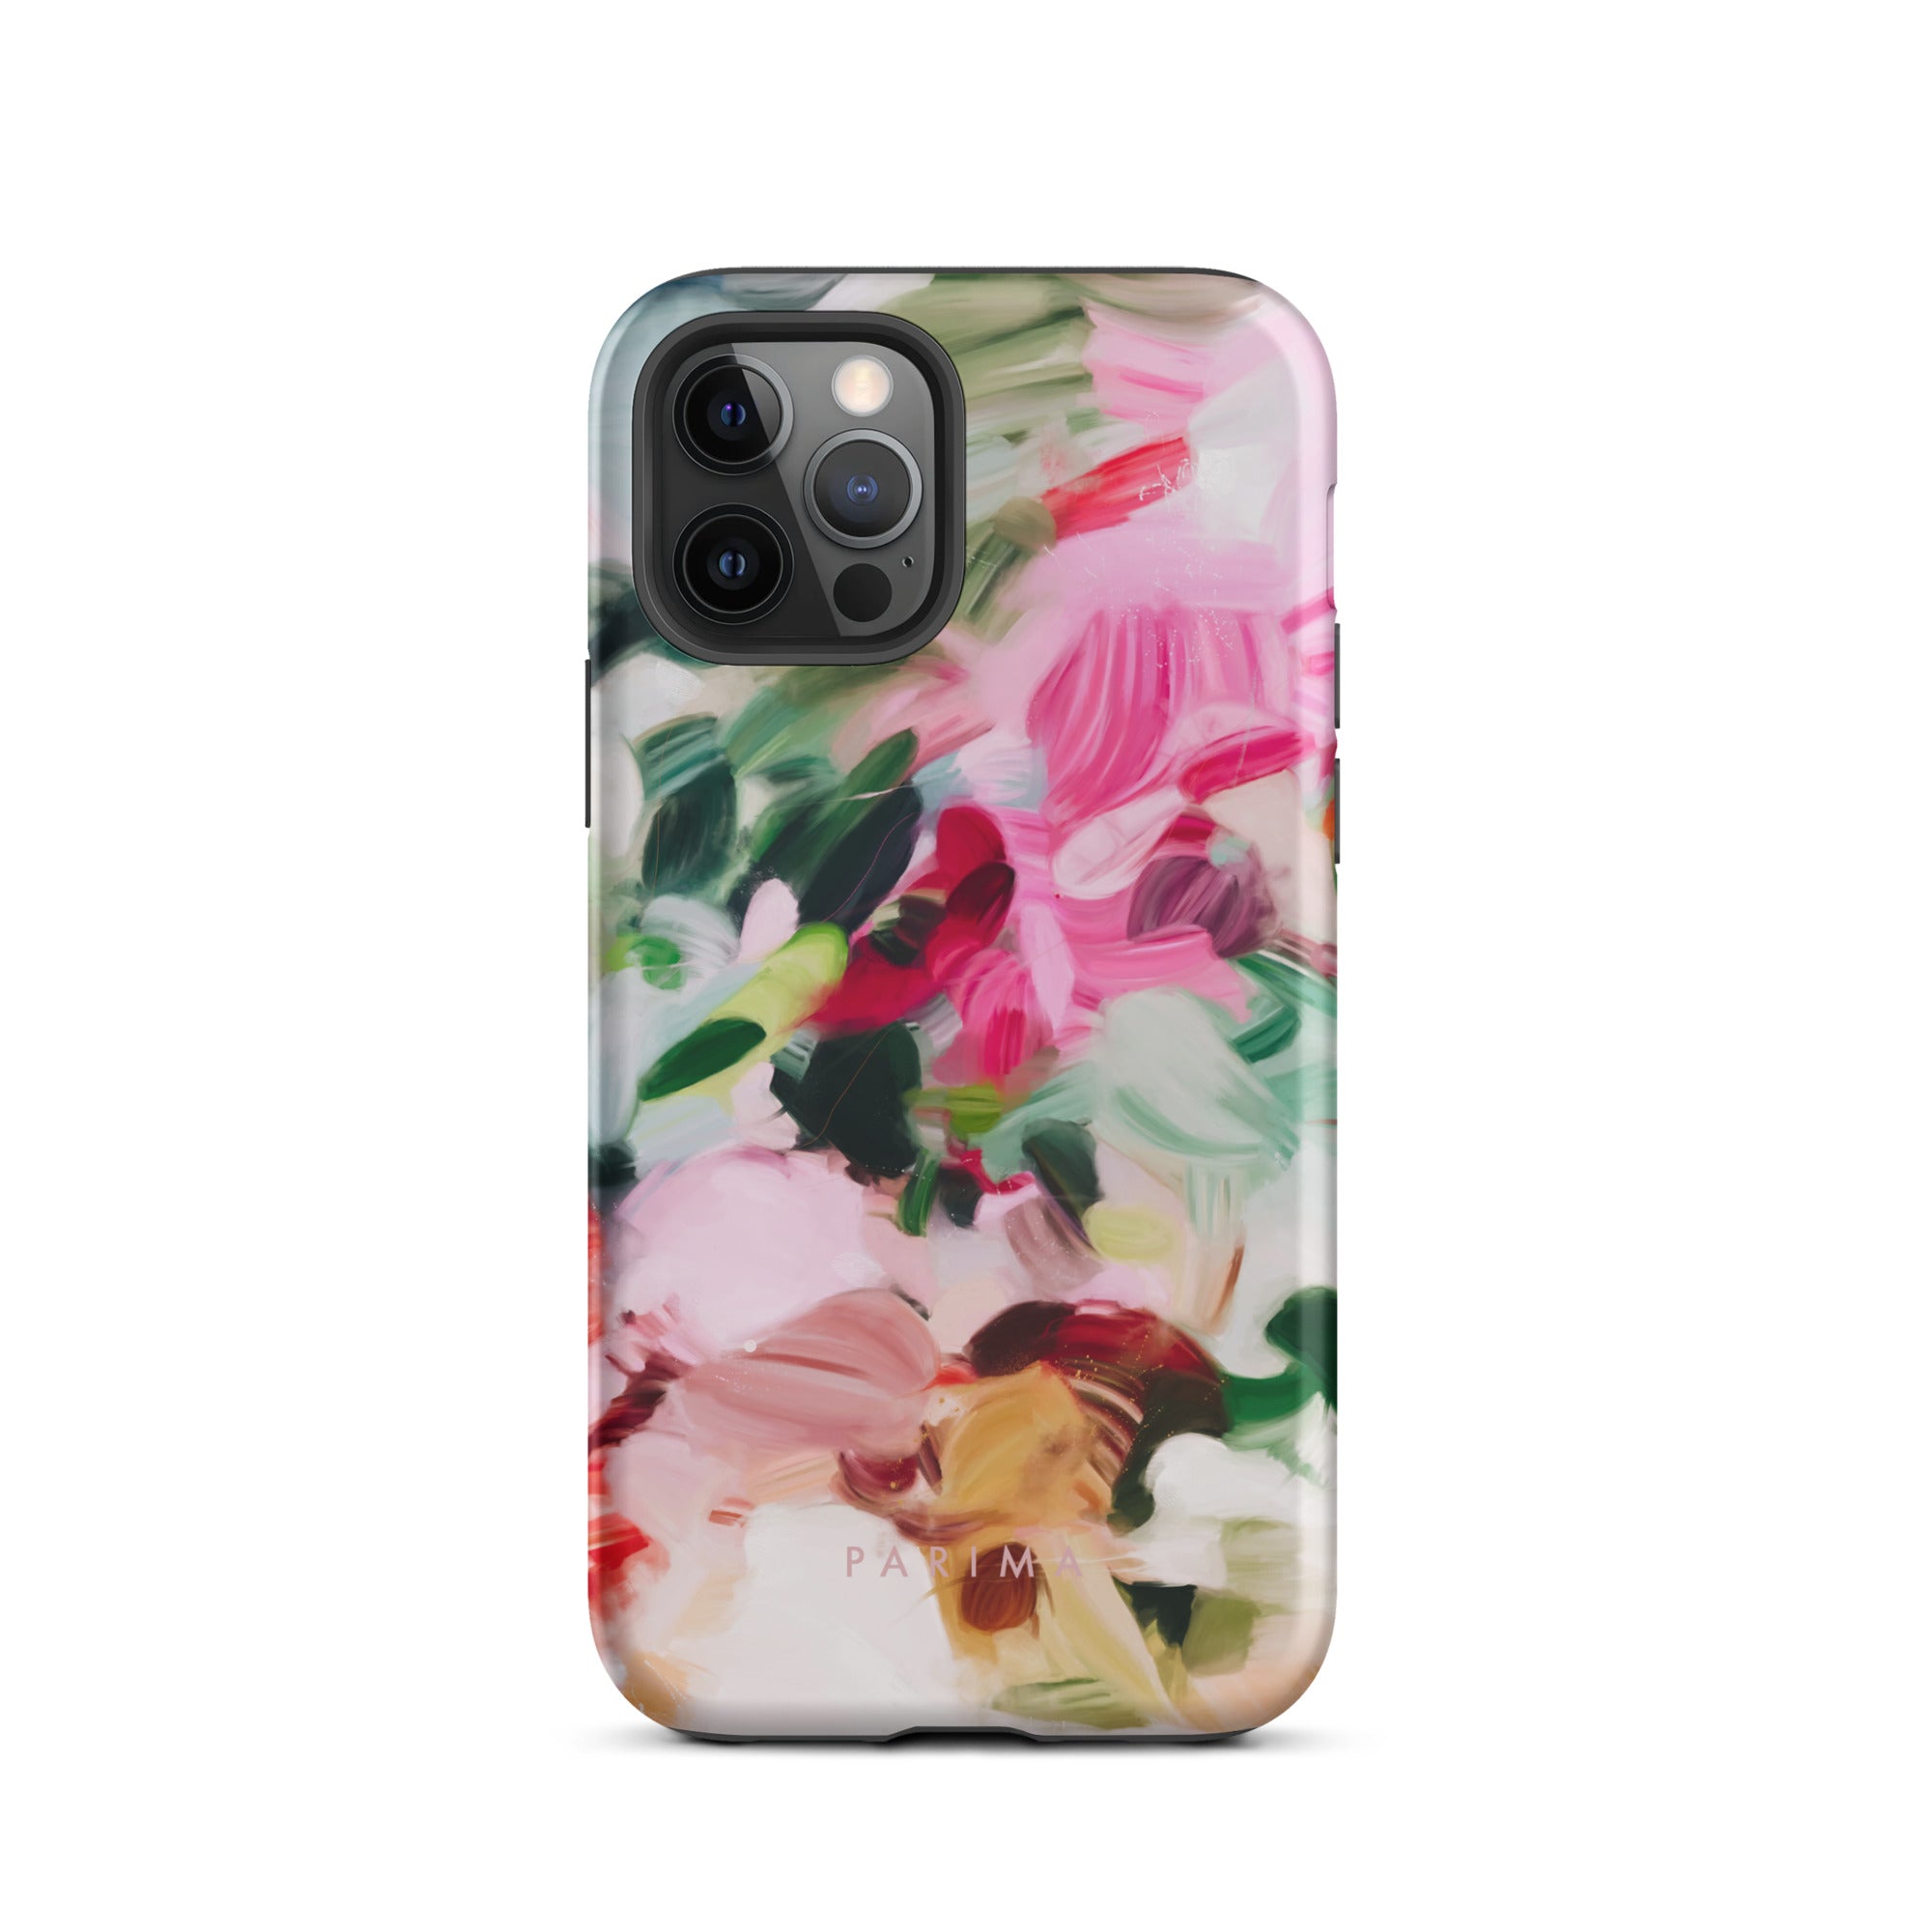 Bloom, pink and green abstract art - iPhone 12 Pro tough case by Parima Studio